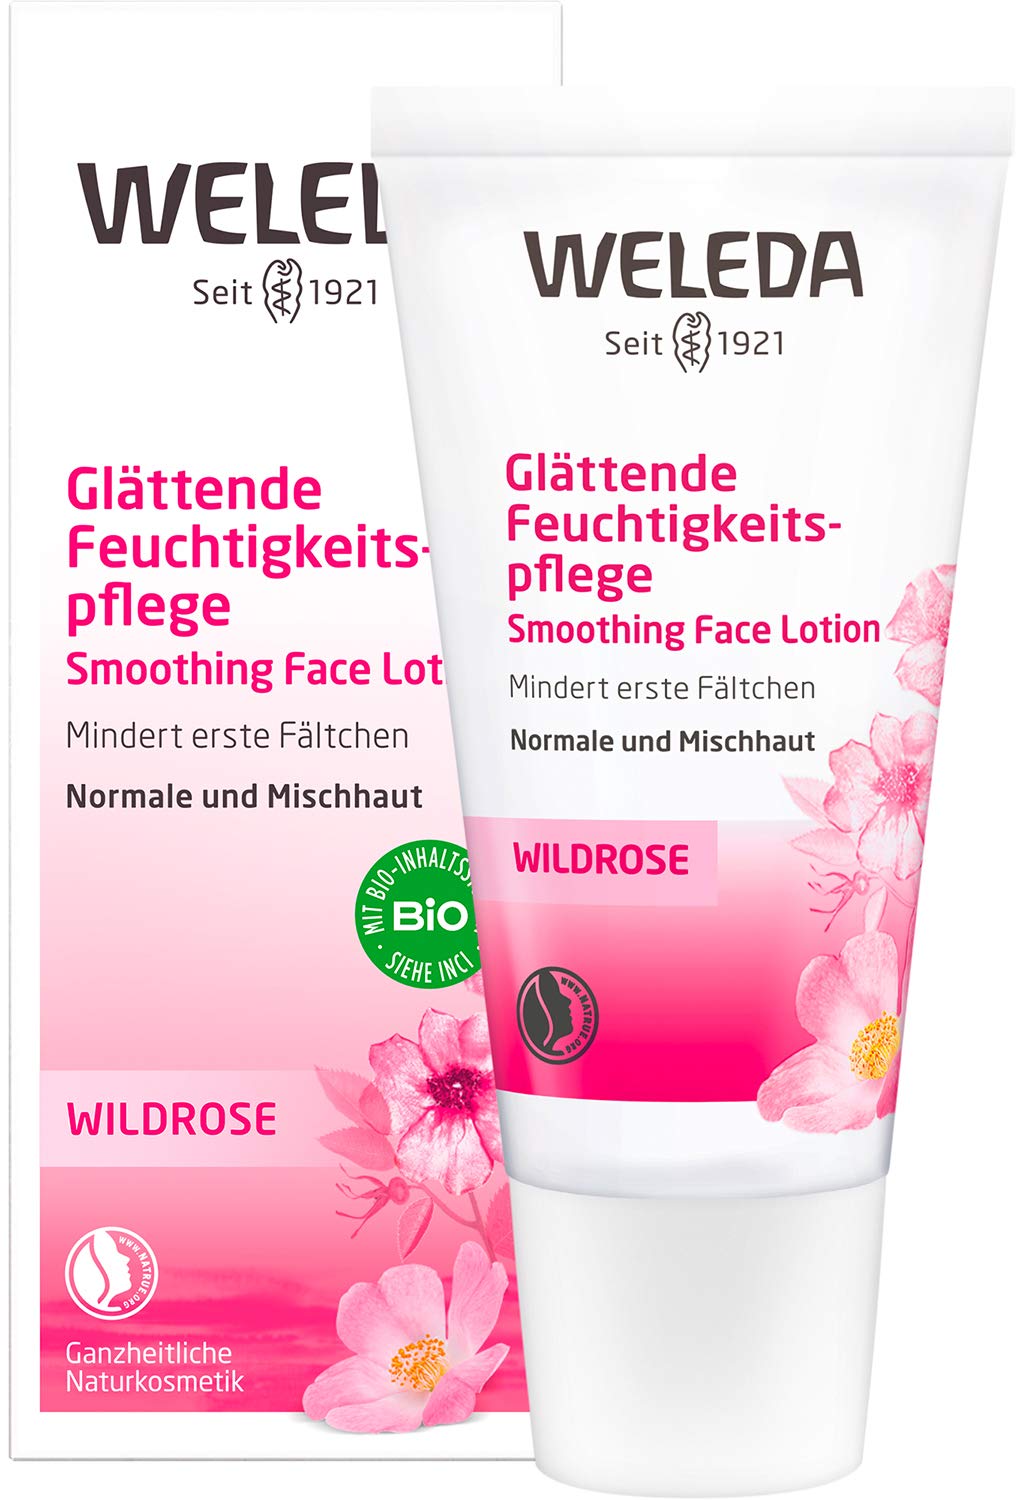 WELEDA Organic Wild Rose Smoothing Moisturiser, Intensively Nourishing Natural Cosmetics Face Cream for Day and Night Care, Reduces First Wrinkles and Protects Against Skin Ageing (1 x 30 ml)